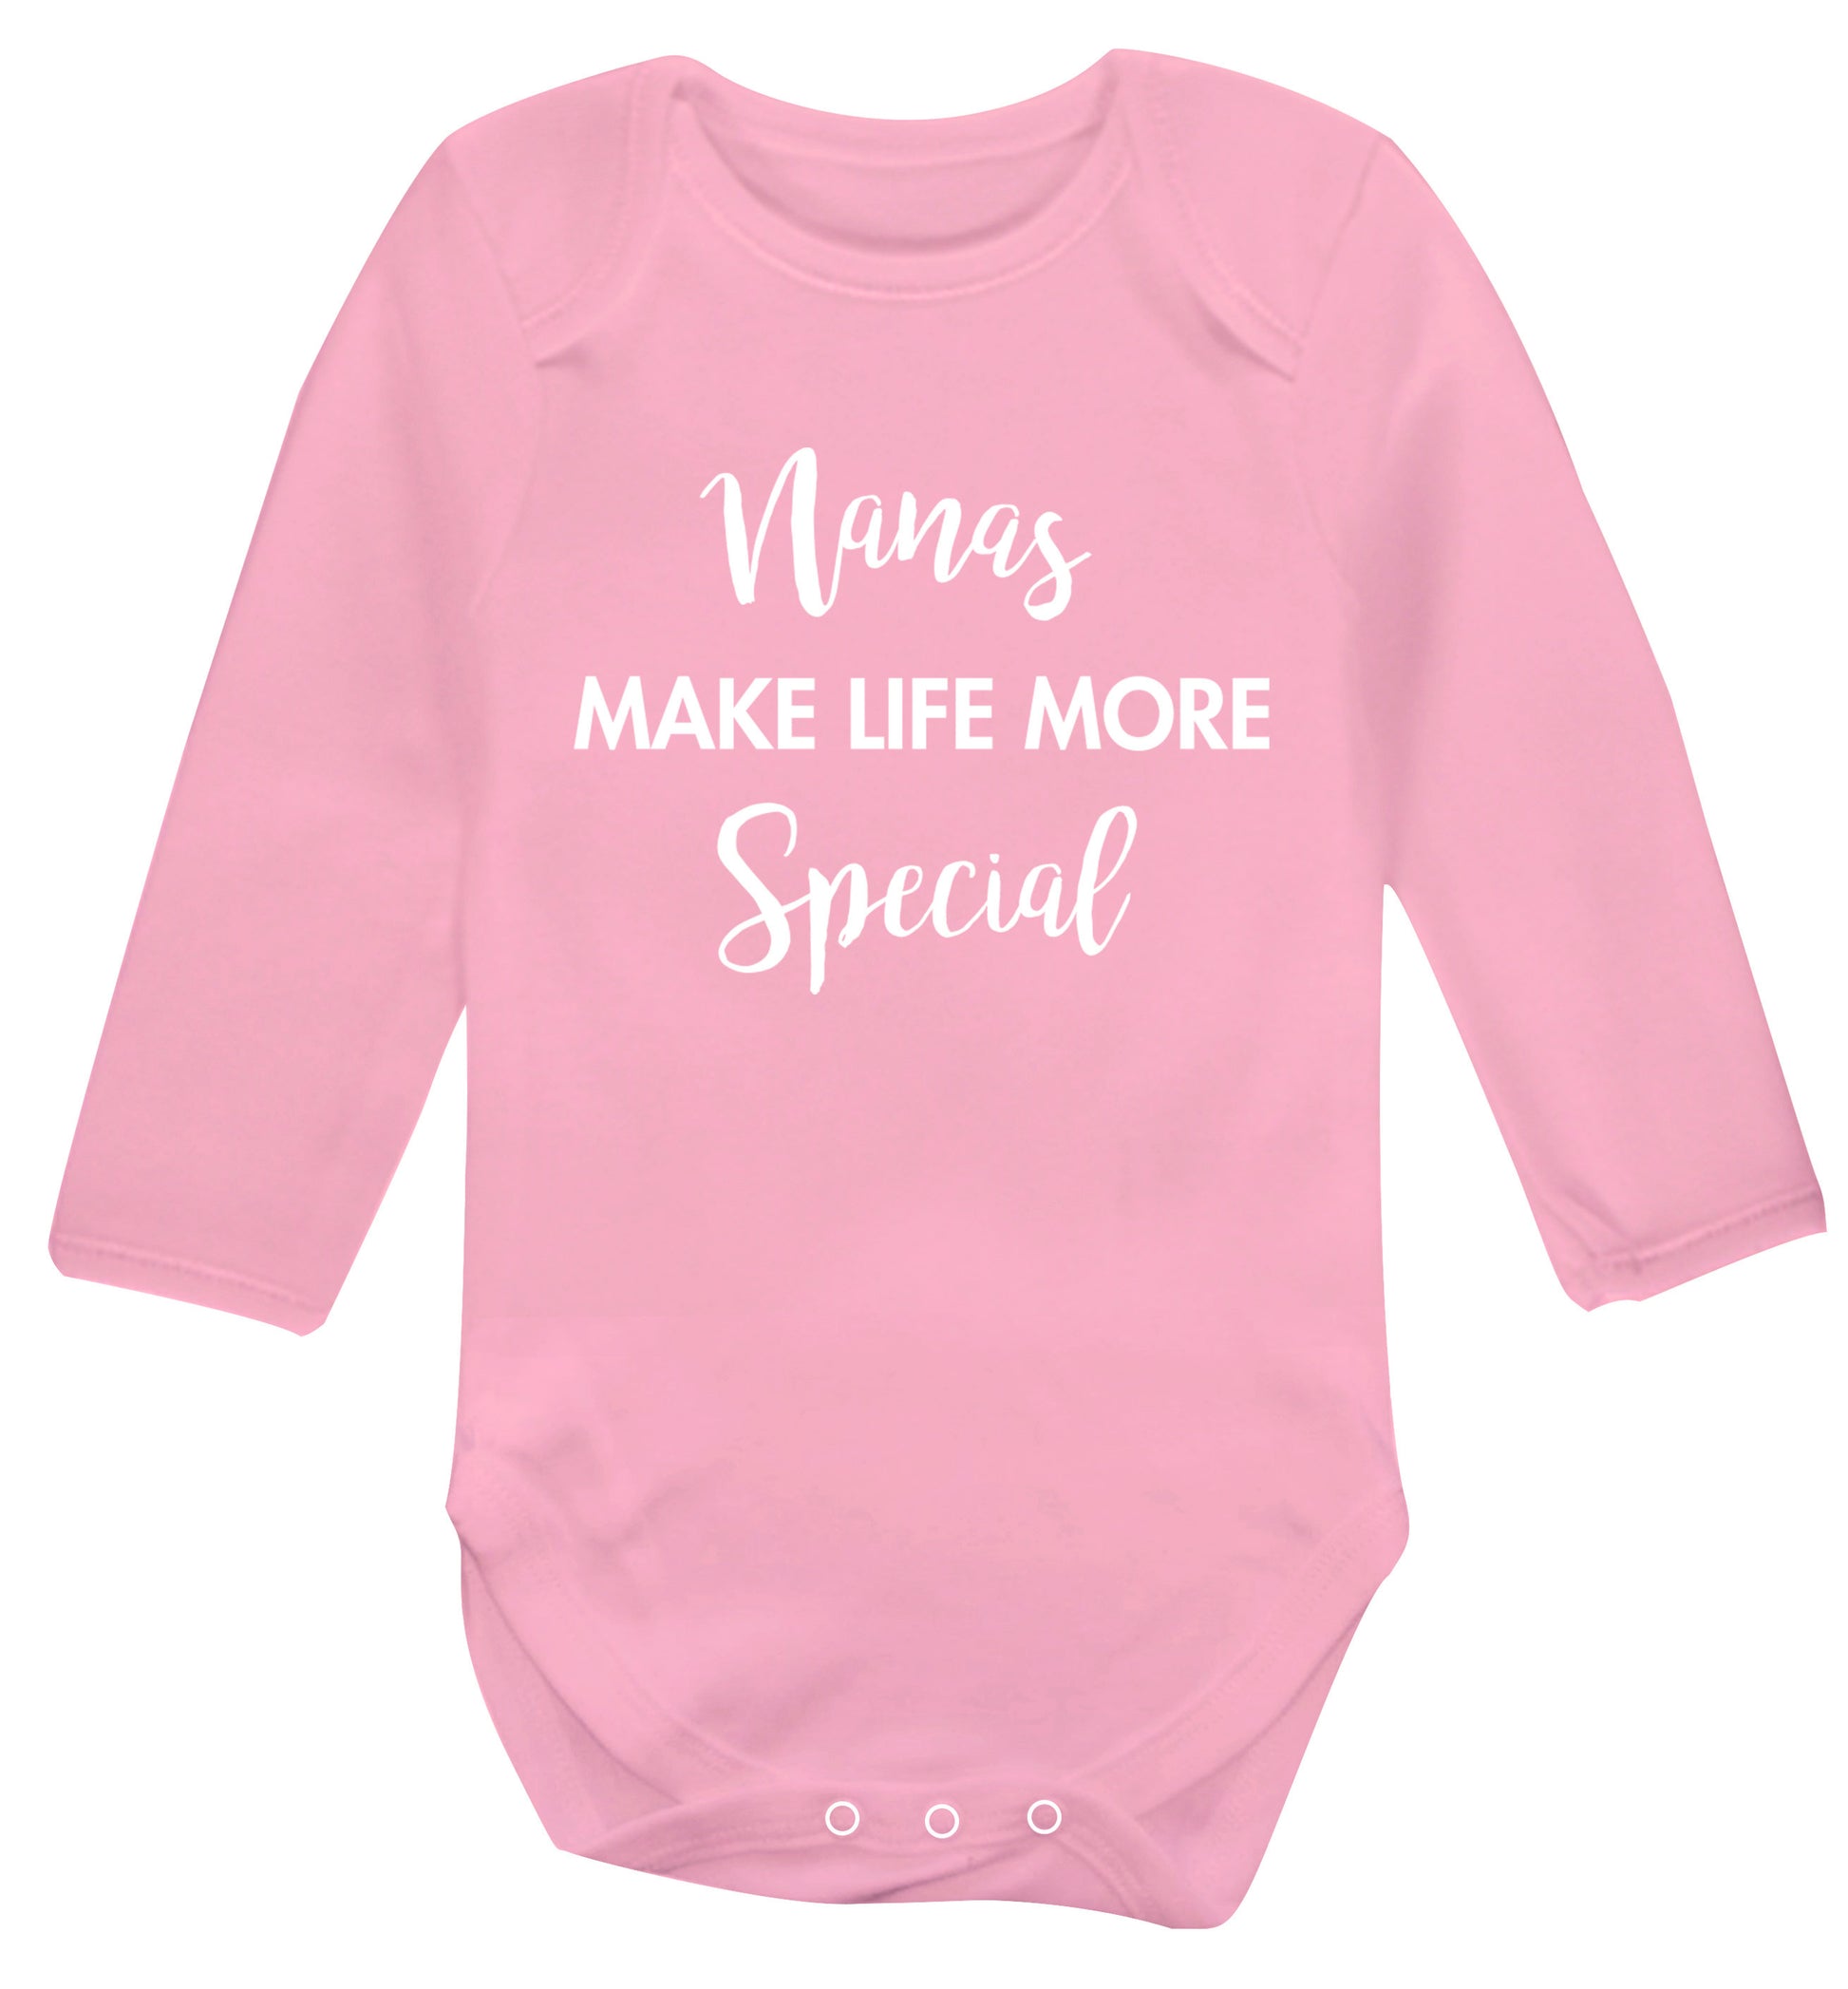 Nanas make life more special Baby Vest long sleeved pale pink 6-12 months